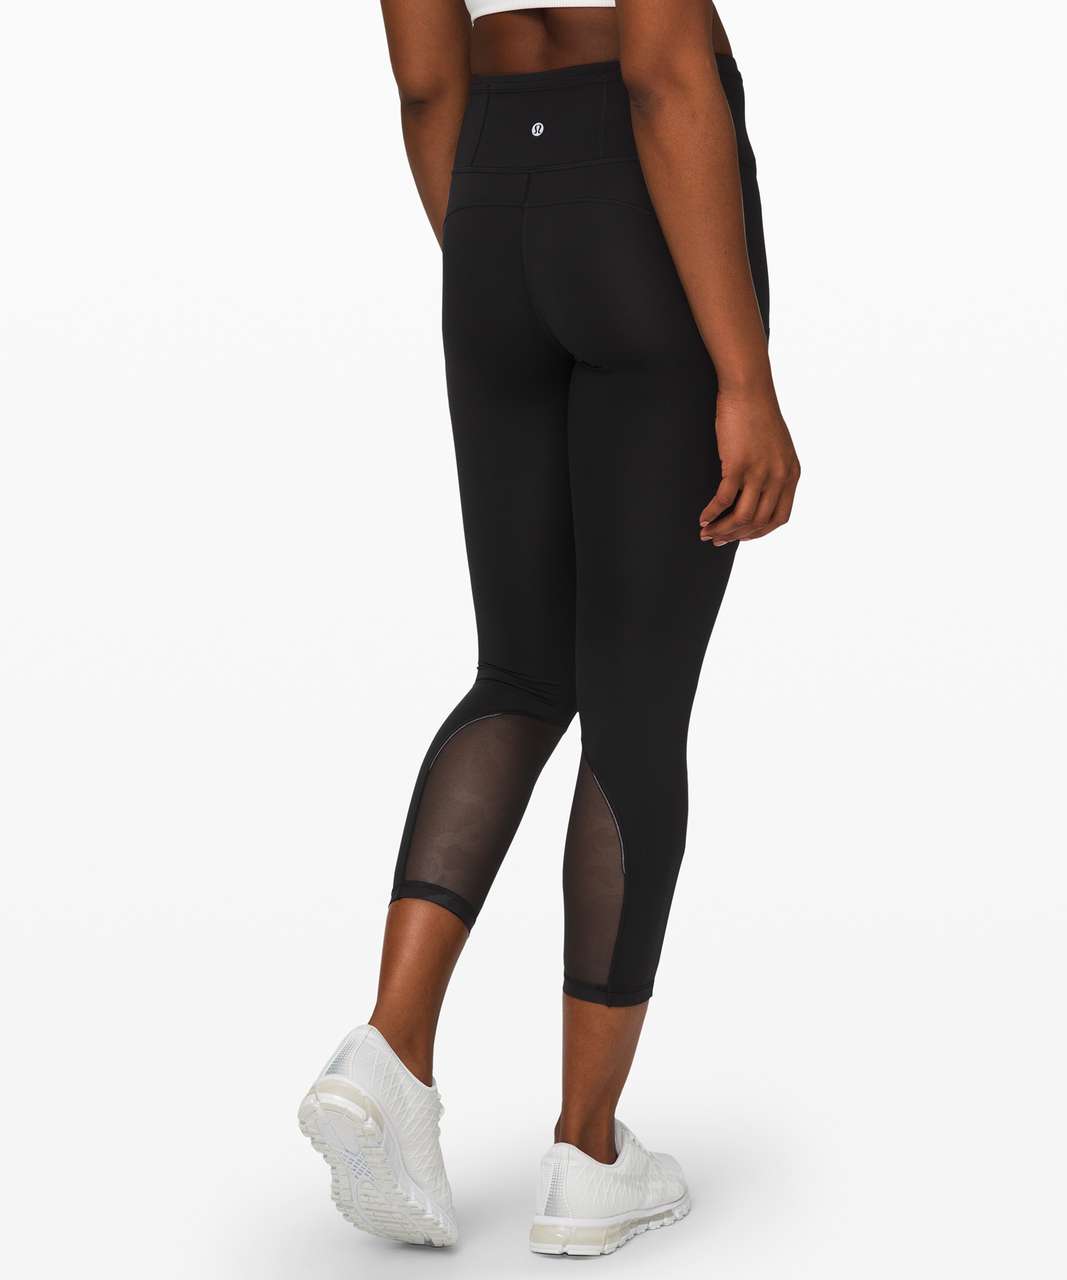 Lululemon Fast and Free Crop 23" *Mesh - Black / Incognito Camo Emboss Rotated Black